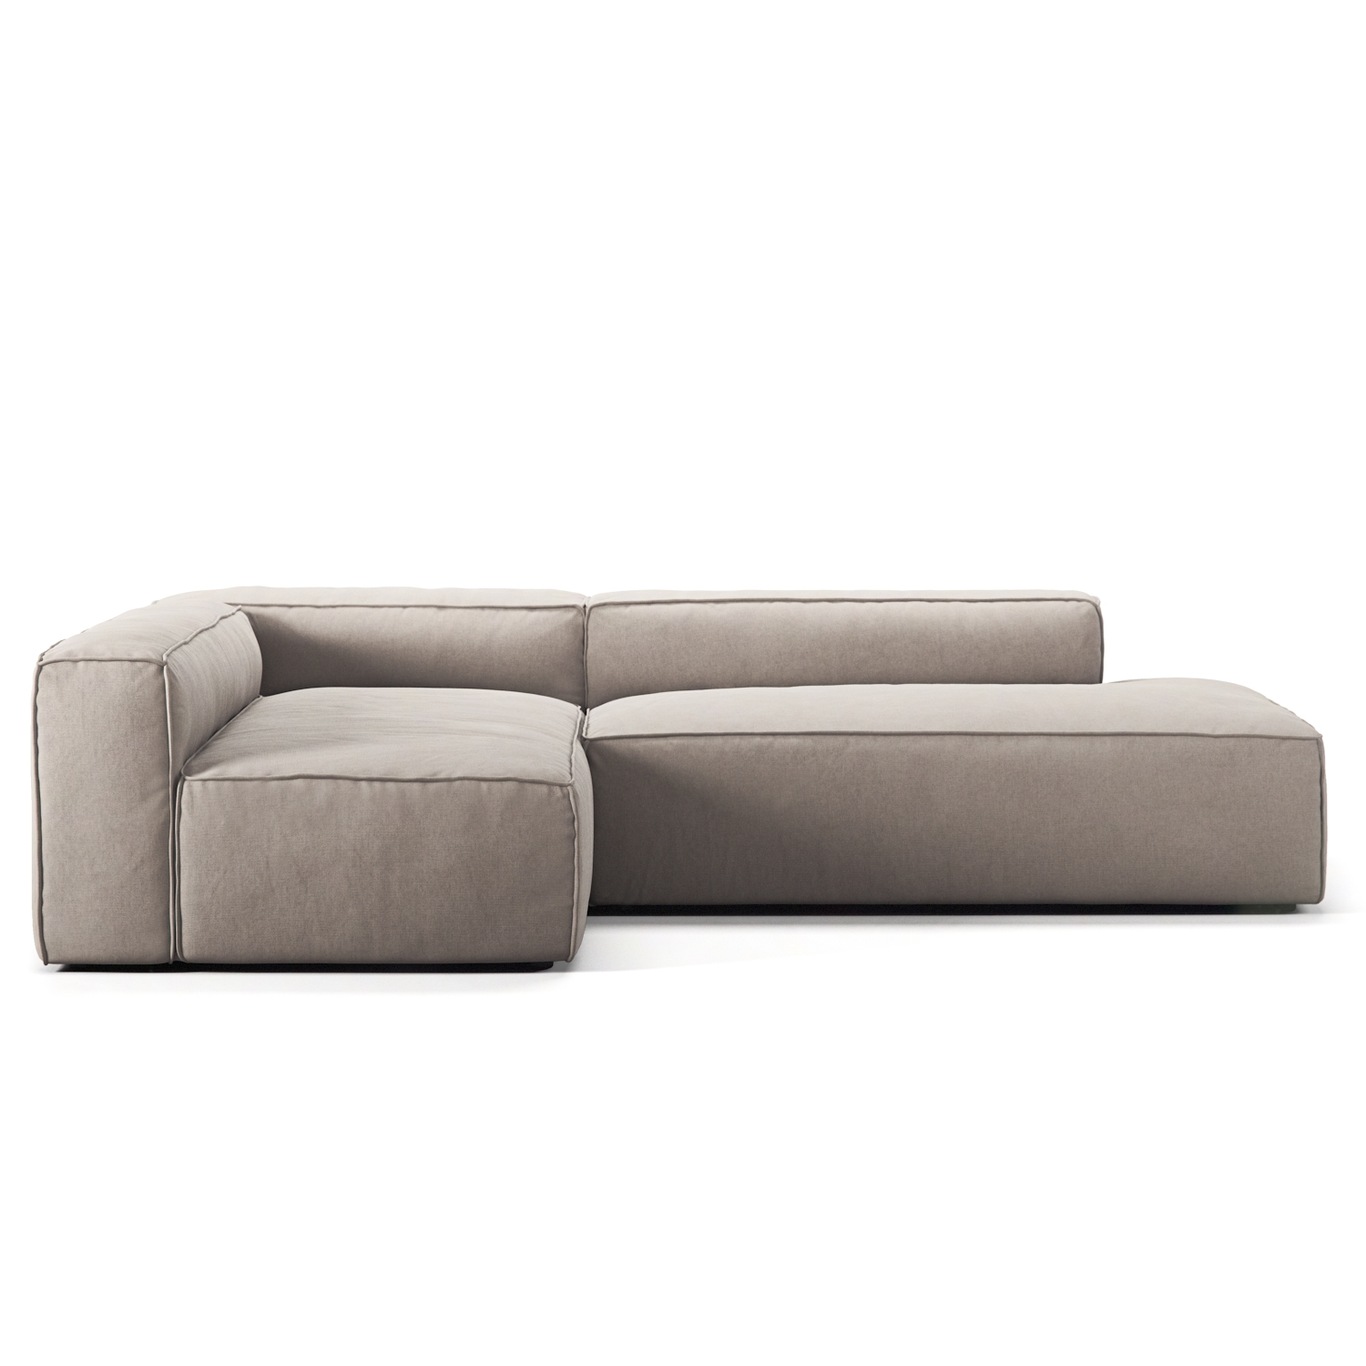 Grand Lounge Sofa 3-Seater open end Right, Sandshell Beige